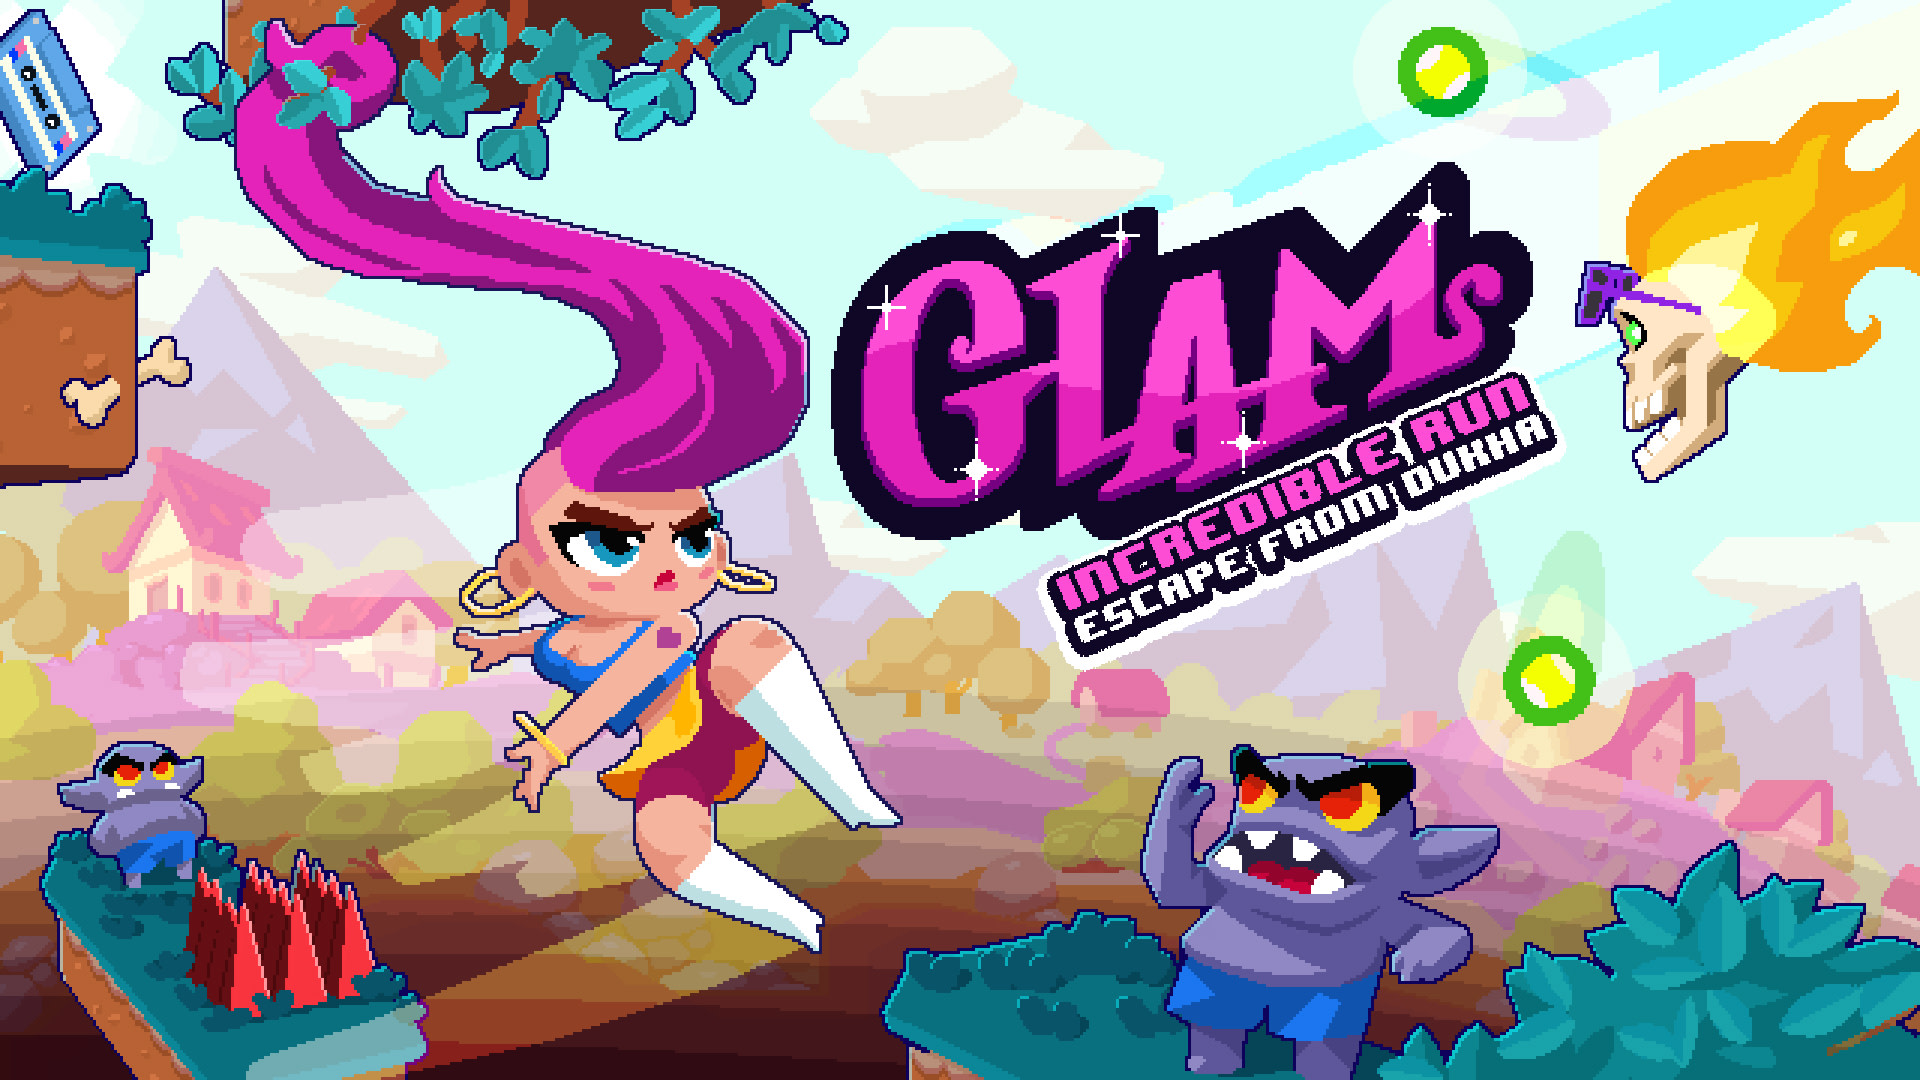 Glam's Incredible Run: Escape from Dukha